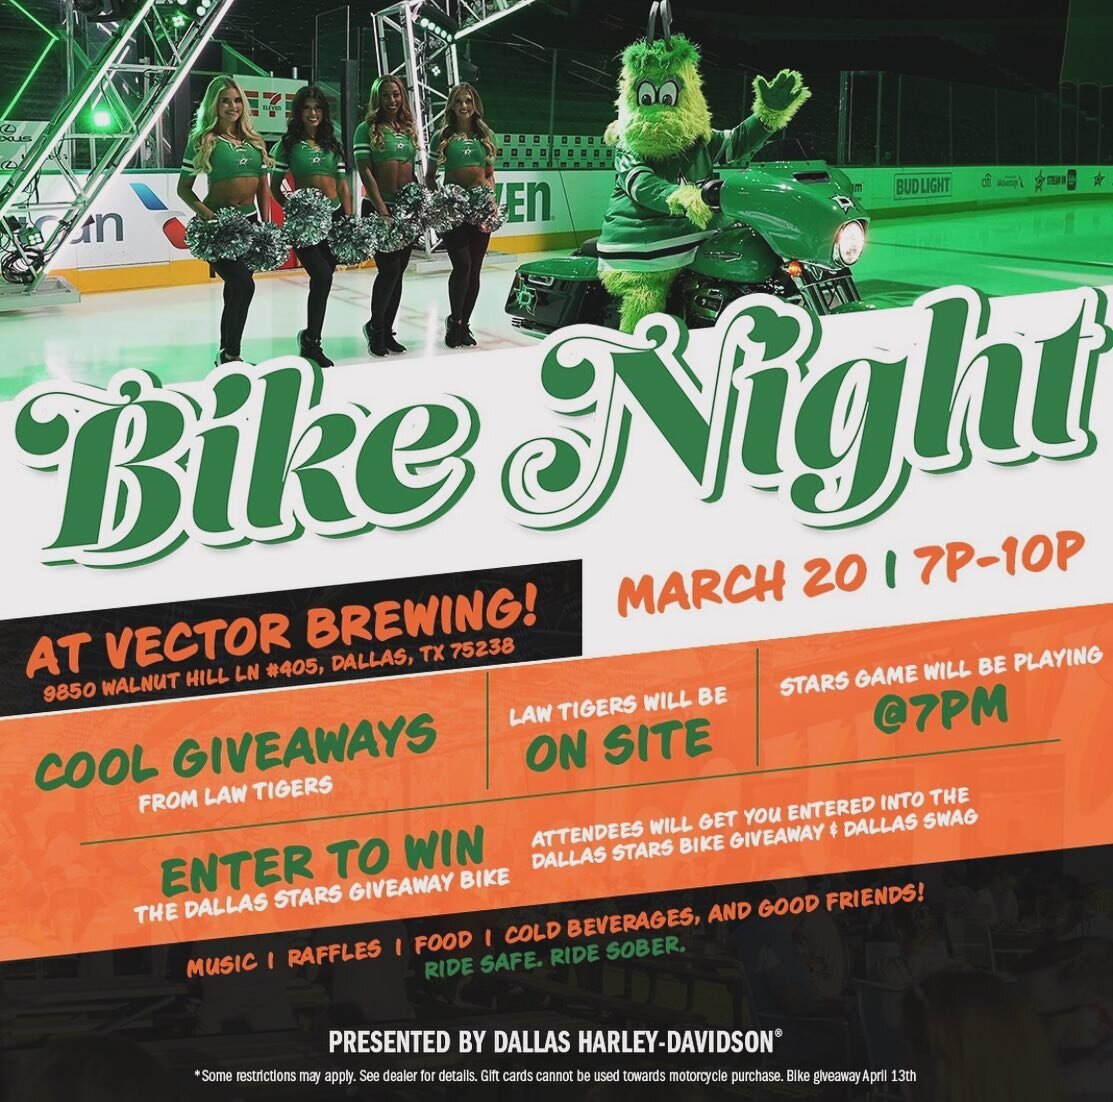 Kick start your hump day and join us for our first 🏍𝘽𝙄𝙆𝙀 𝙉𝙄𝙂𝙃𝙏 🏍 tonight from 7-10pm, presented by @dallasharleydavidson. Their crew, along with @lawtigersdallastexas will be out here with cool giveaways and a raffle🎟 - including your cha